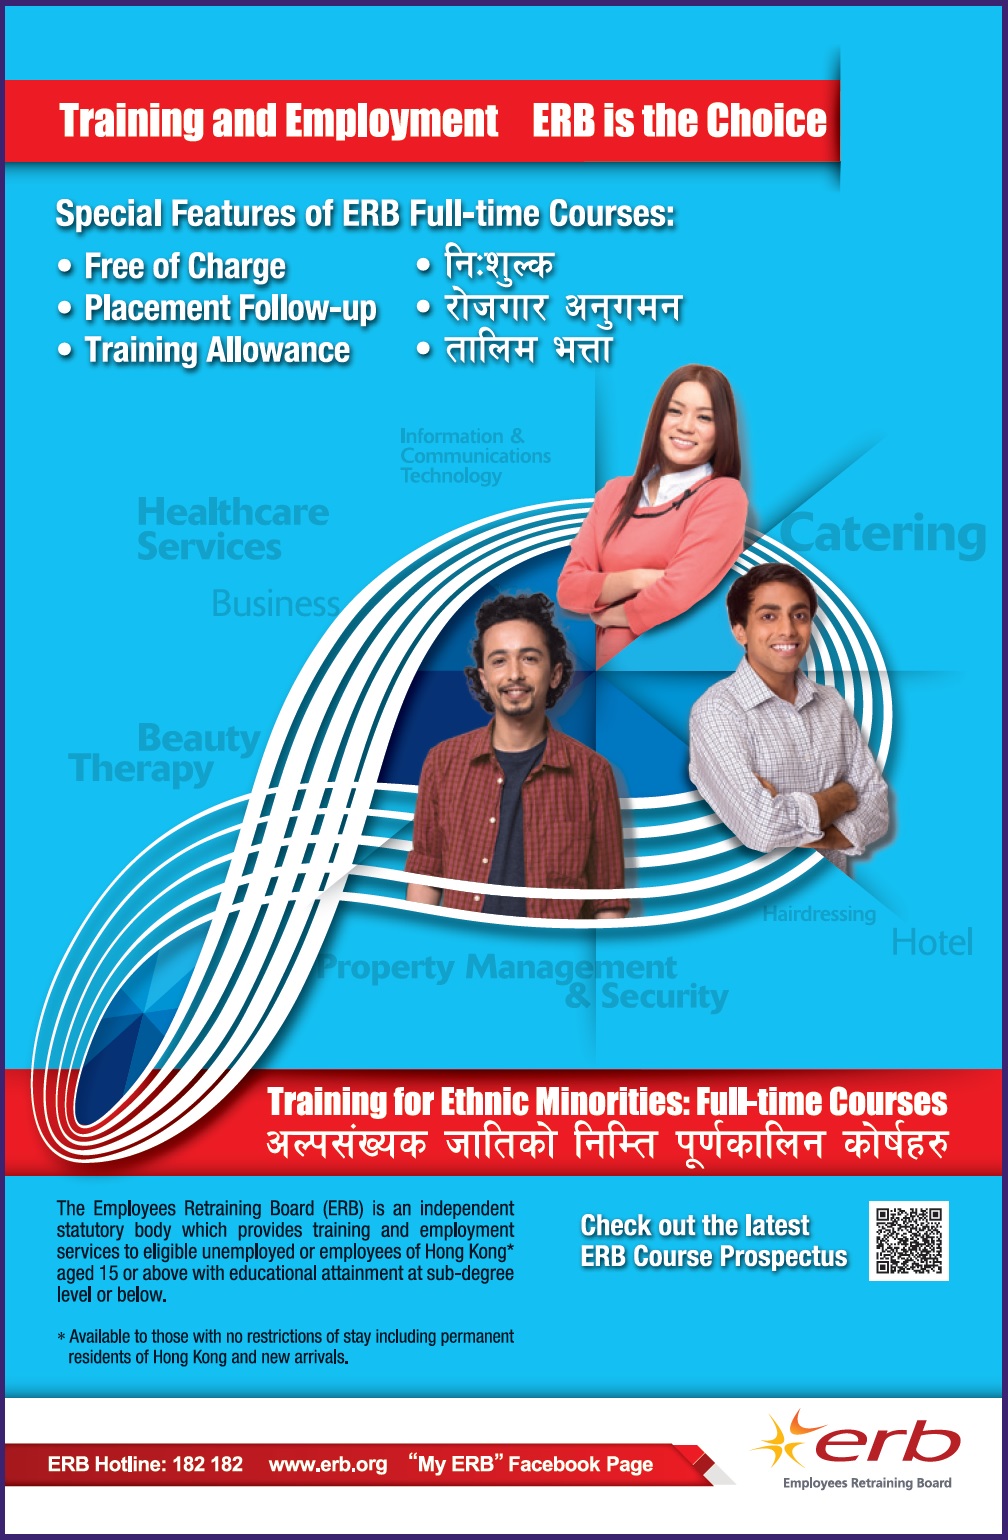 Click here to download the image version of newspaper advertisement of Training for Ethnic Minorities (May 2018) (Nepali)